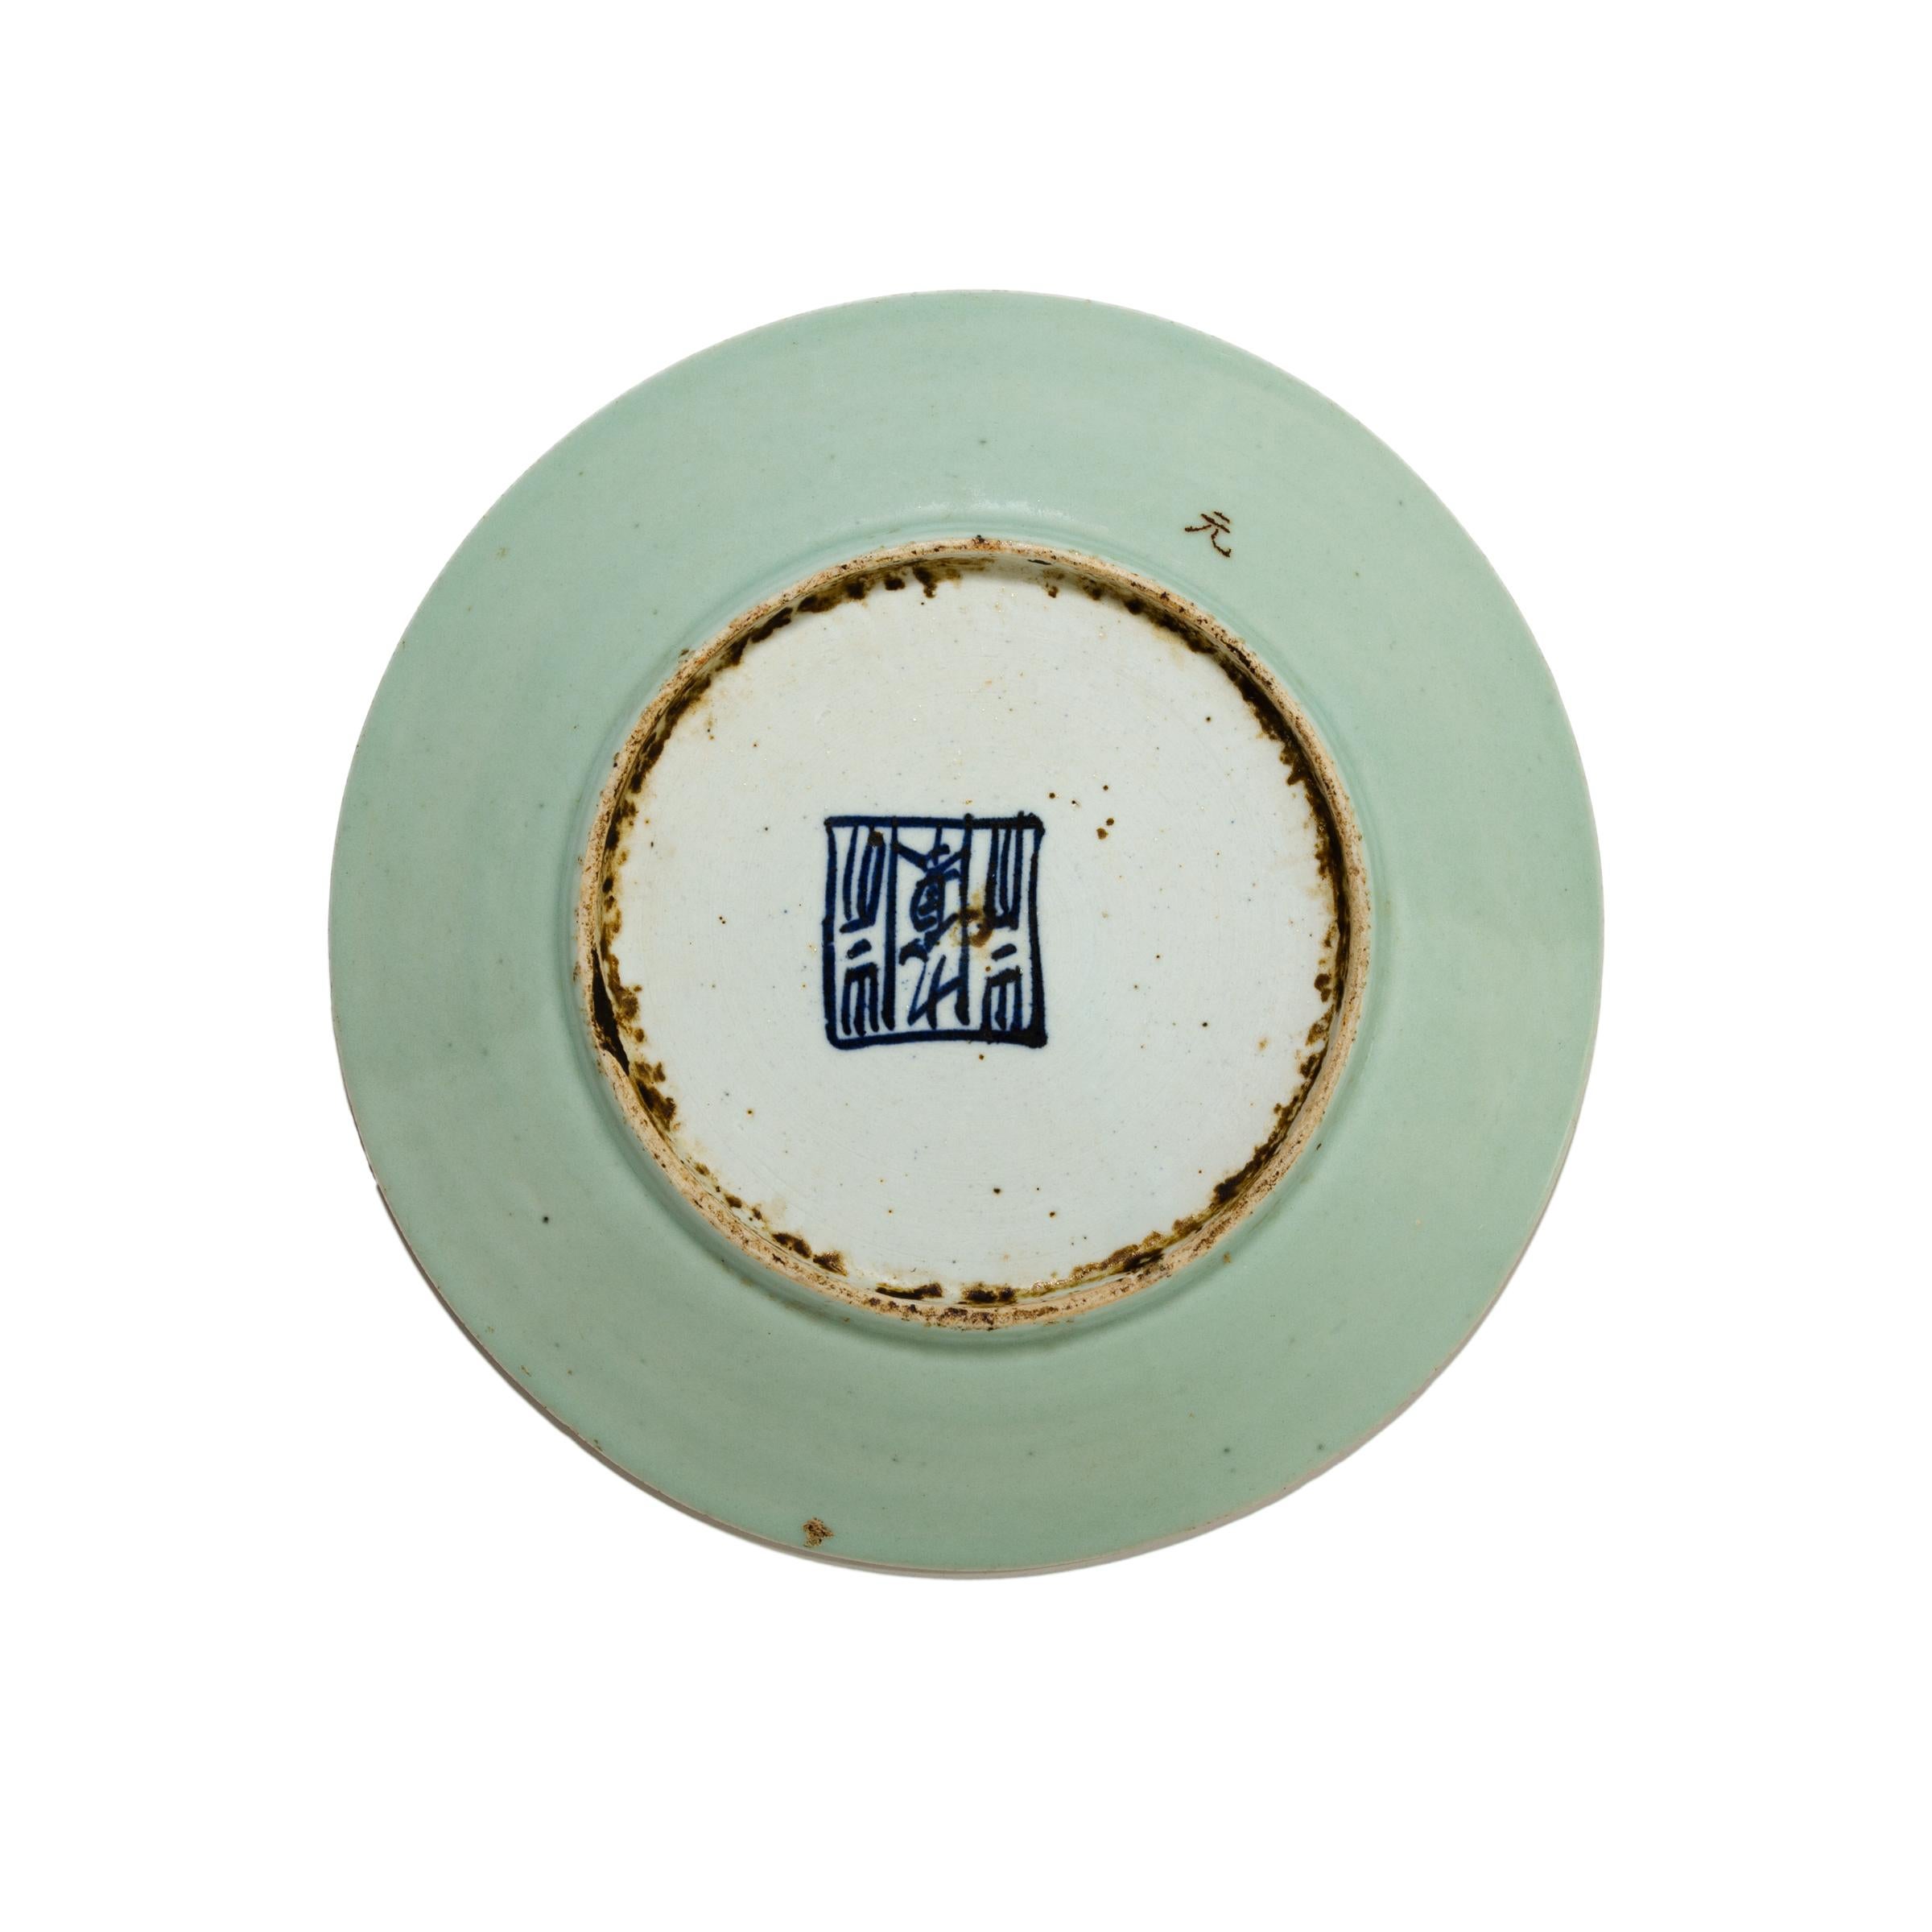 Described by ancient Chinese as a “full moon dyed with spring water,” celadon ware is prized for its lustrous green glaze. Perfected over the centuries, the glaze ranges in color from blue-green to olive green, owing to the amount of iron oxide